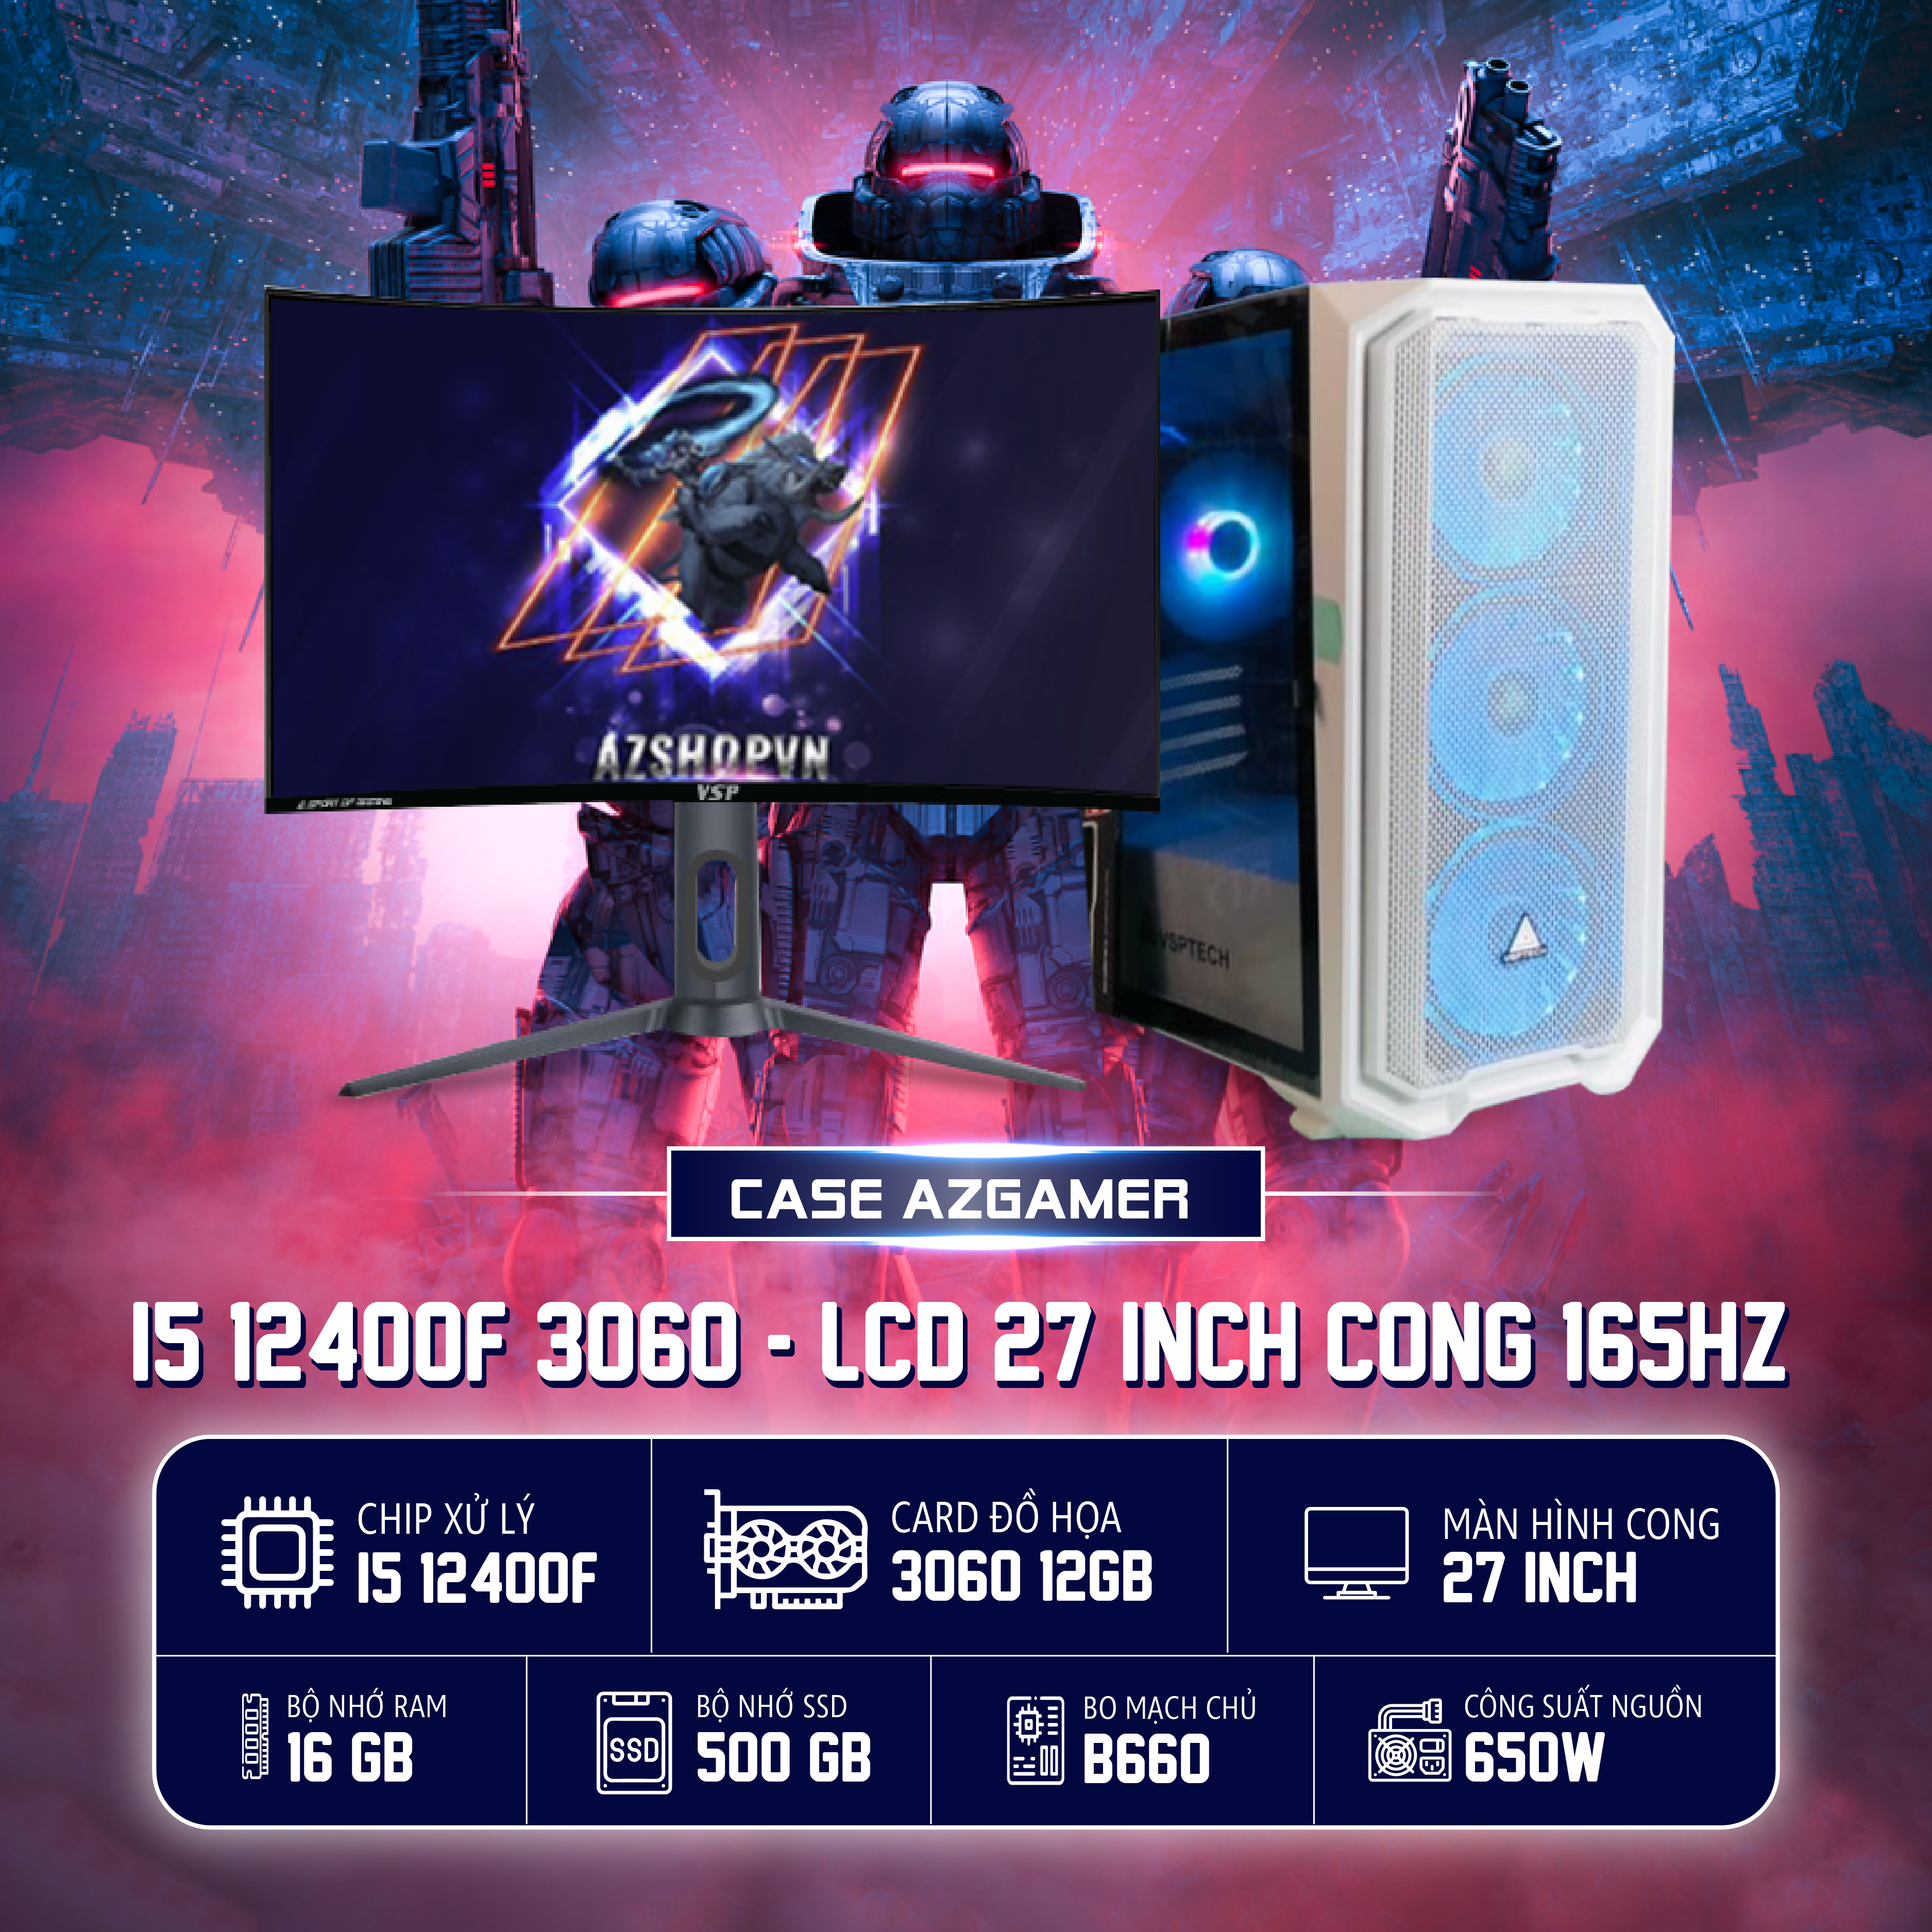 🔊 𝐂𝐚𝐬𝐞 𝐀𝐳𝐆𝐚𝐦𝐞𝐫 𝐢𝟓 𝟏2𝟒𝟎𝟎𝐅 3060 12𝐠𝐛 & LCD 27 inch Cong 165hz !